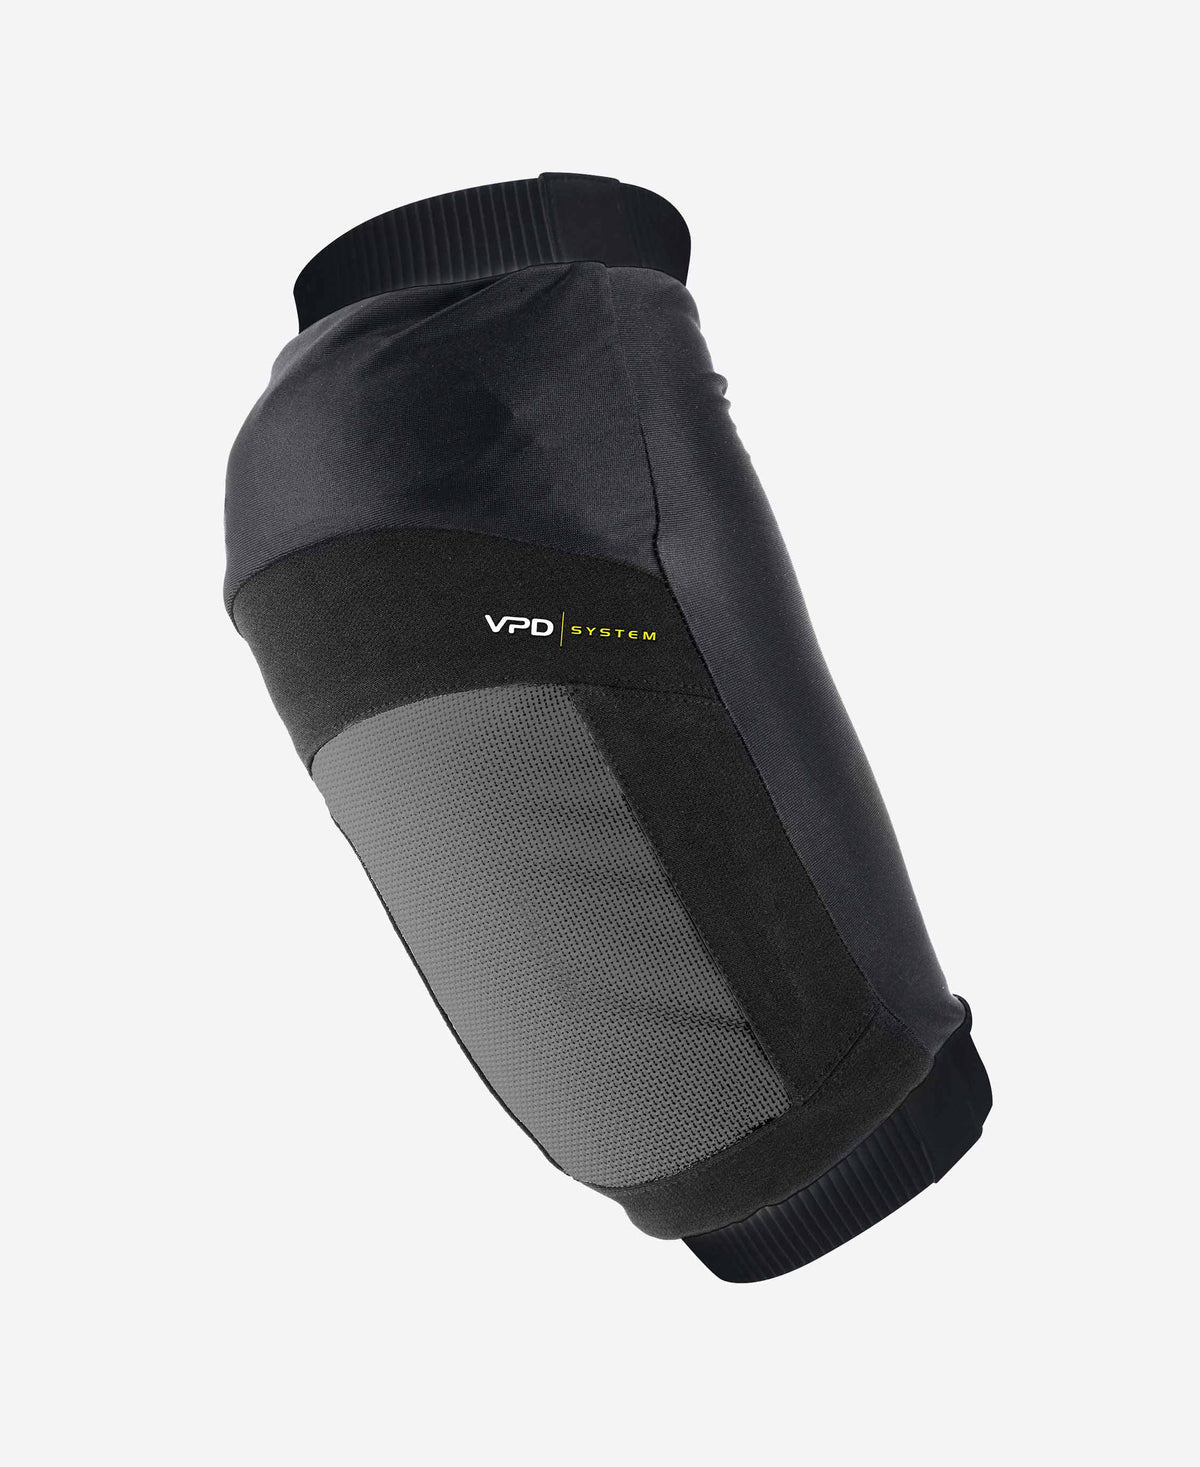 POC JOINT VPD SYSTEM ELBOW PROTECTION